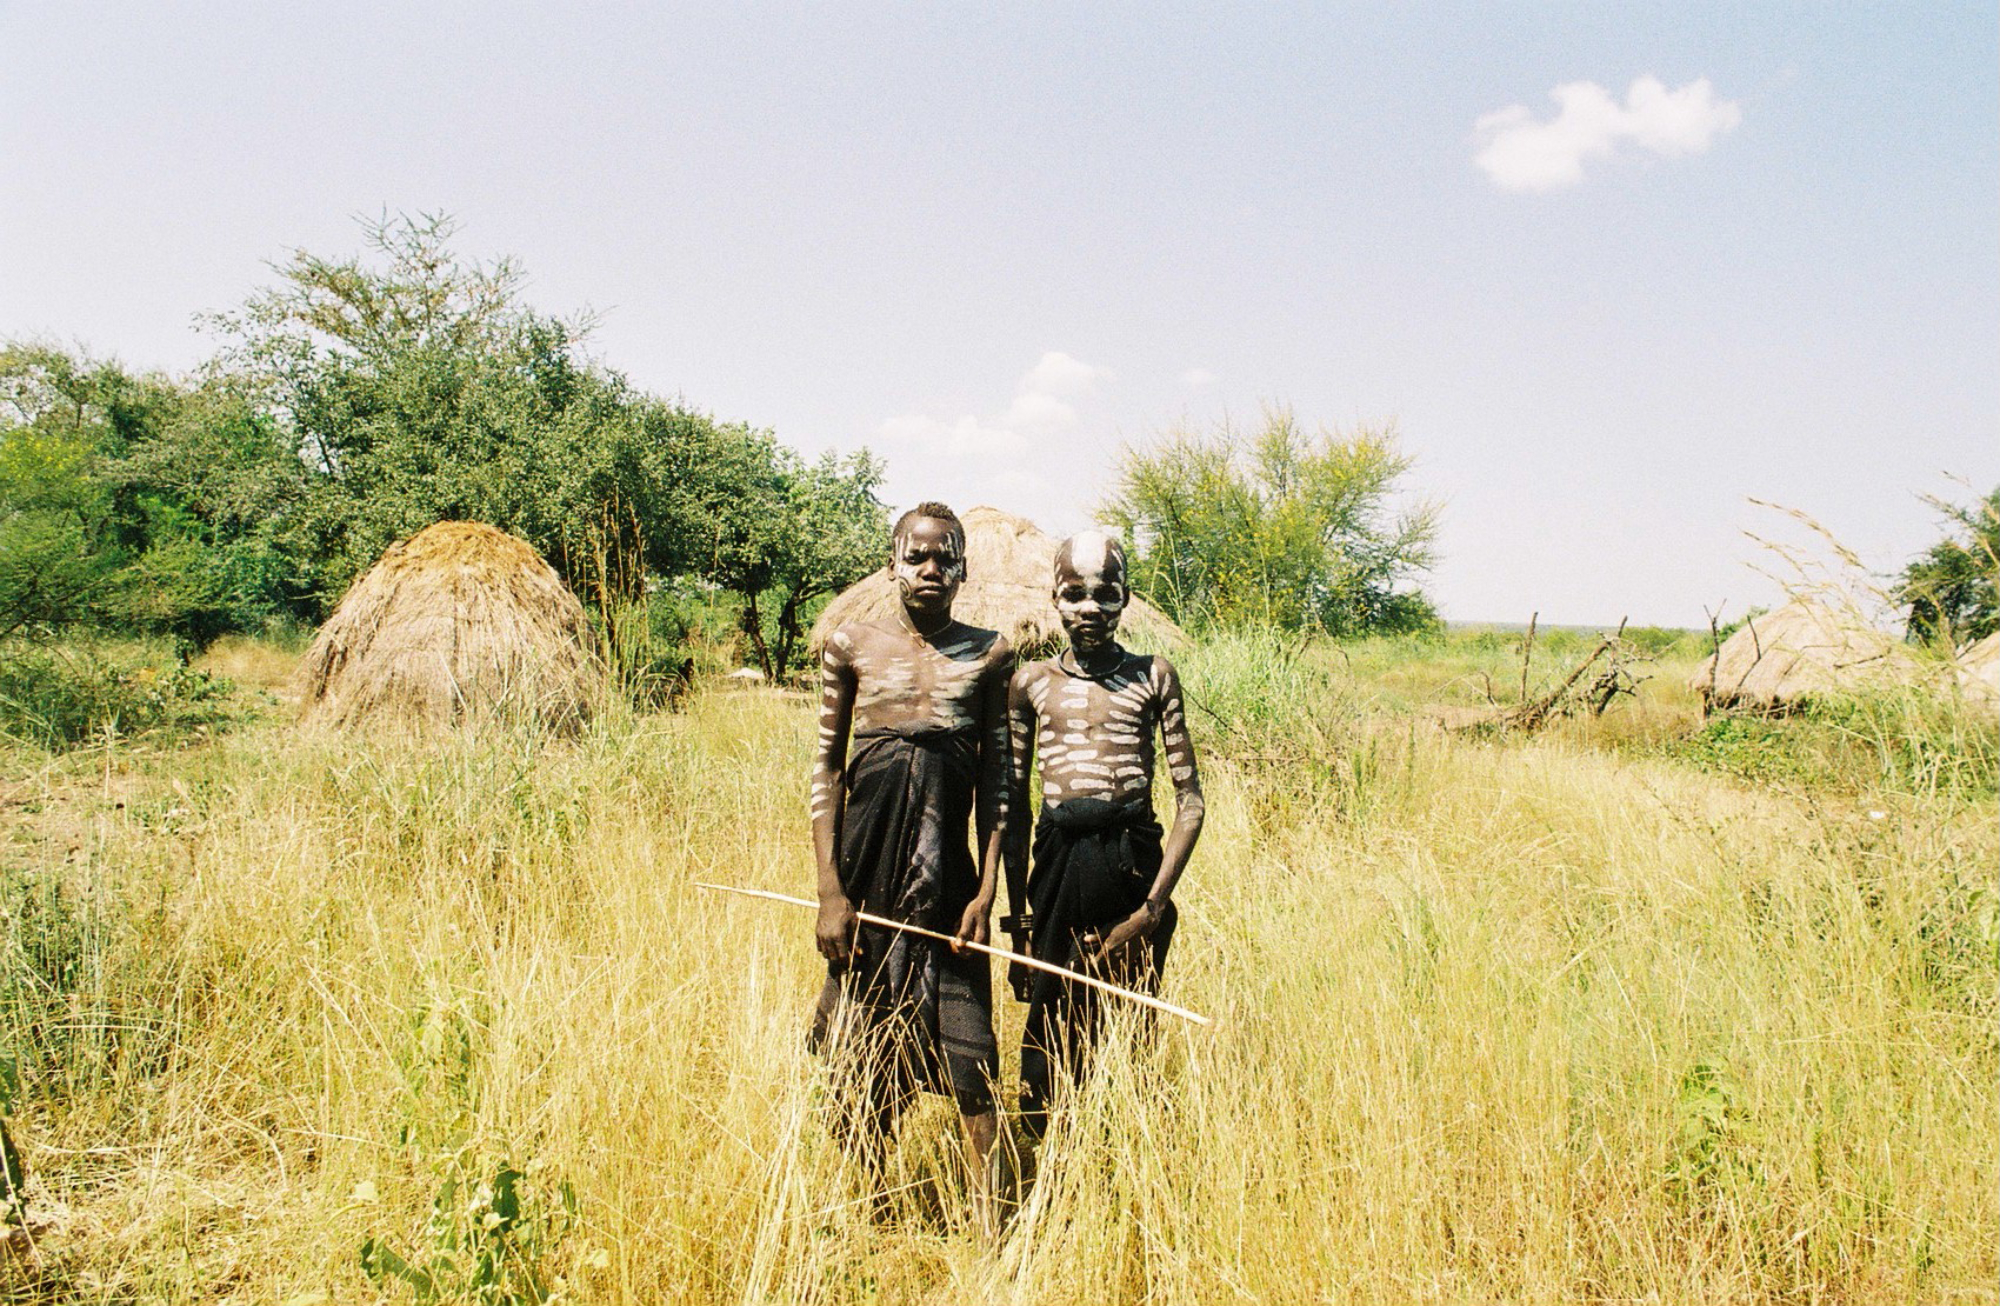  Two young members of the Mursi tribe in Ethiopia's Omo Valley stand stoically together. The community is becoming used to seeing tourists, and intentionally "dress-up" to capitalize on photo opportunities. As more tourists travel into the tribal reg